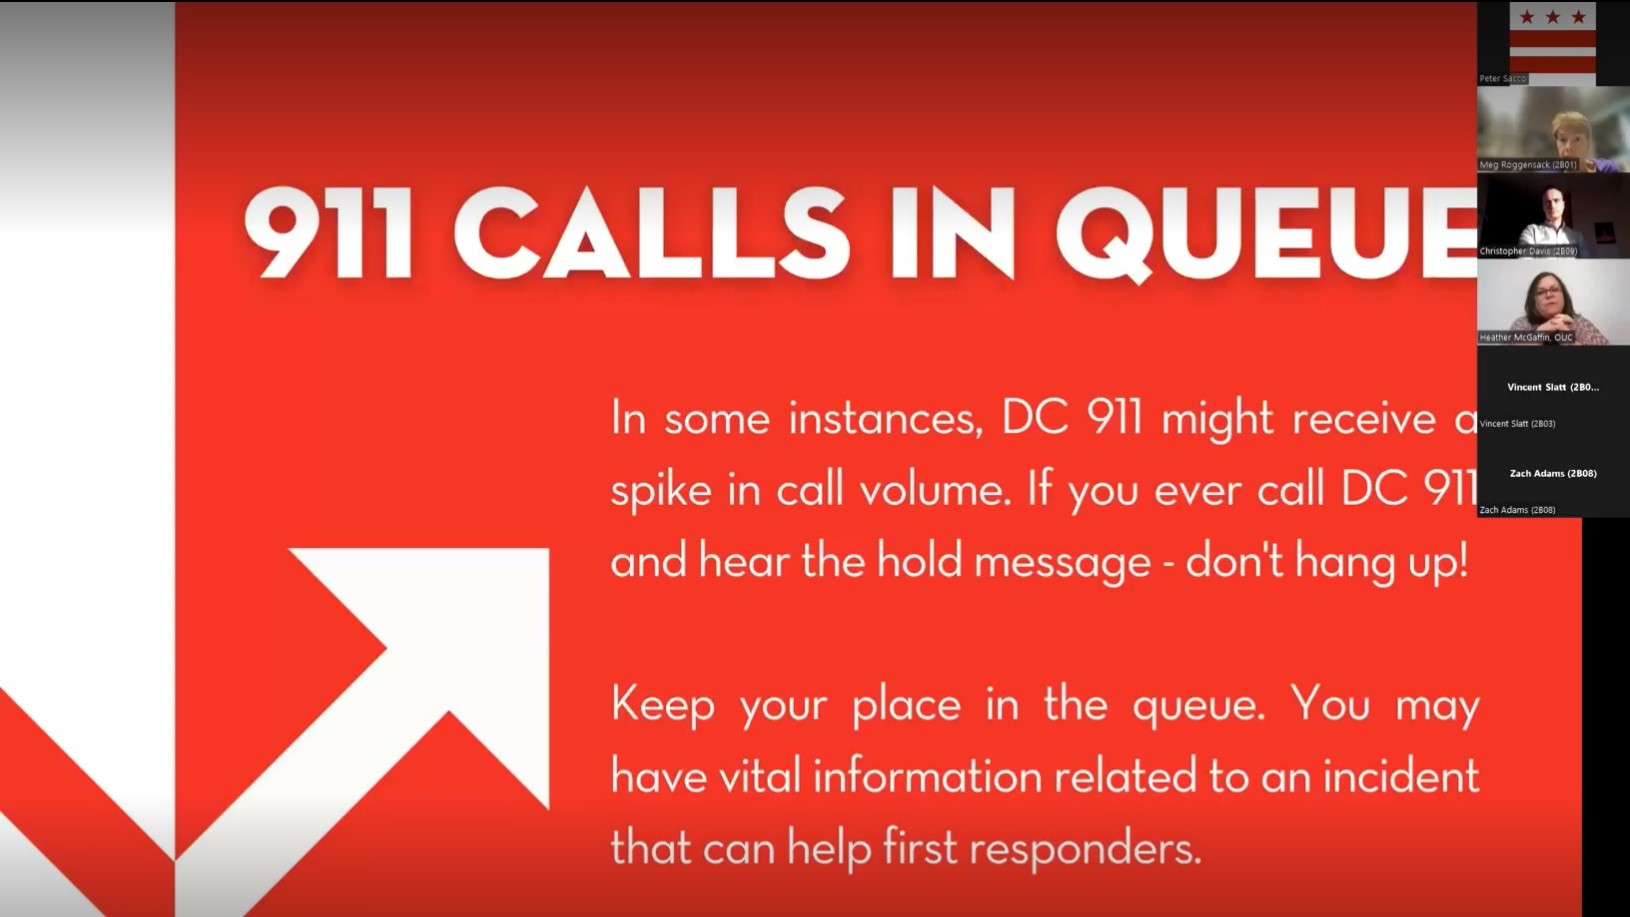 DC 911 boss explains why 911 calls aren’t answered — ‘I just
don’t have enough people’